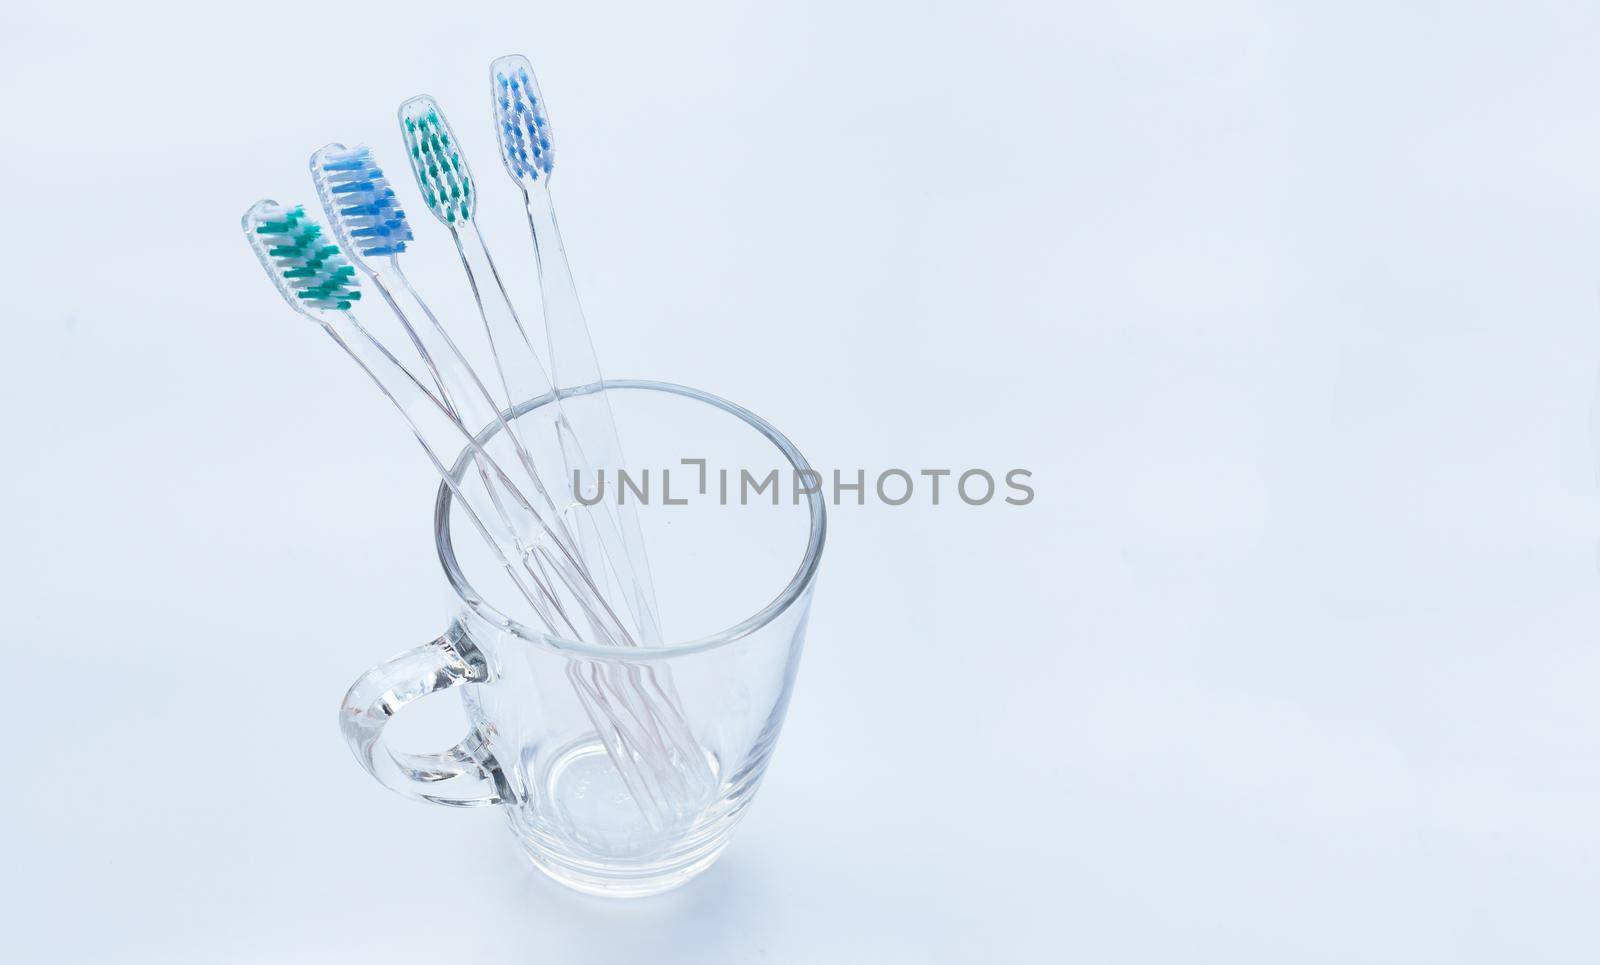 Toothbrushes in a glass on white. Copy space by Bowonpat